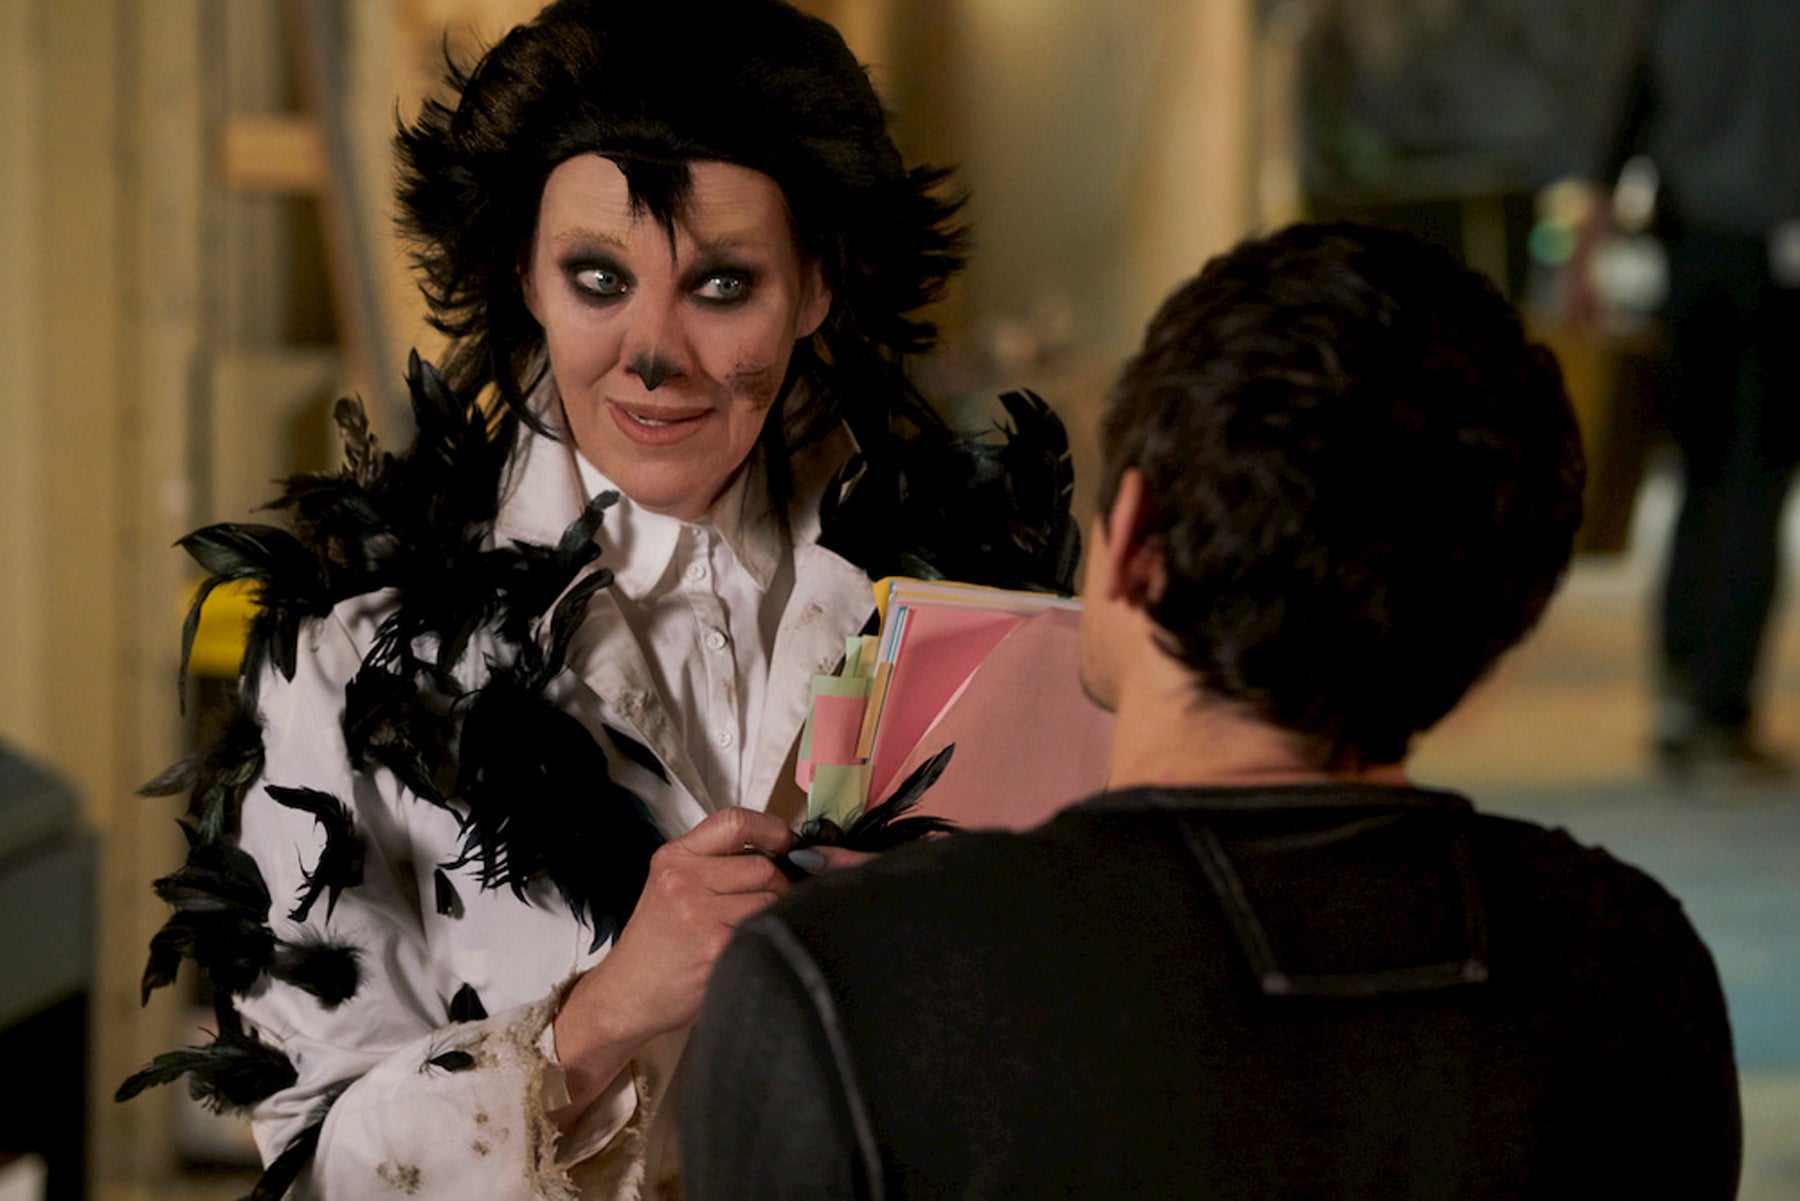 Moira rose, dressed as a bird and holding a script, speaks to a man in the foreground.